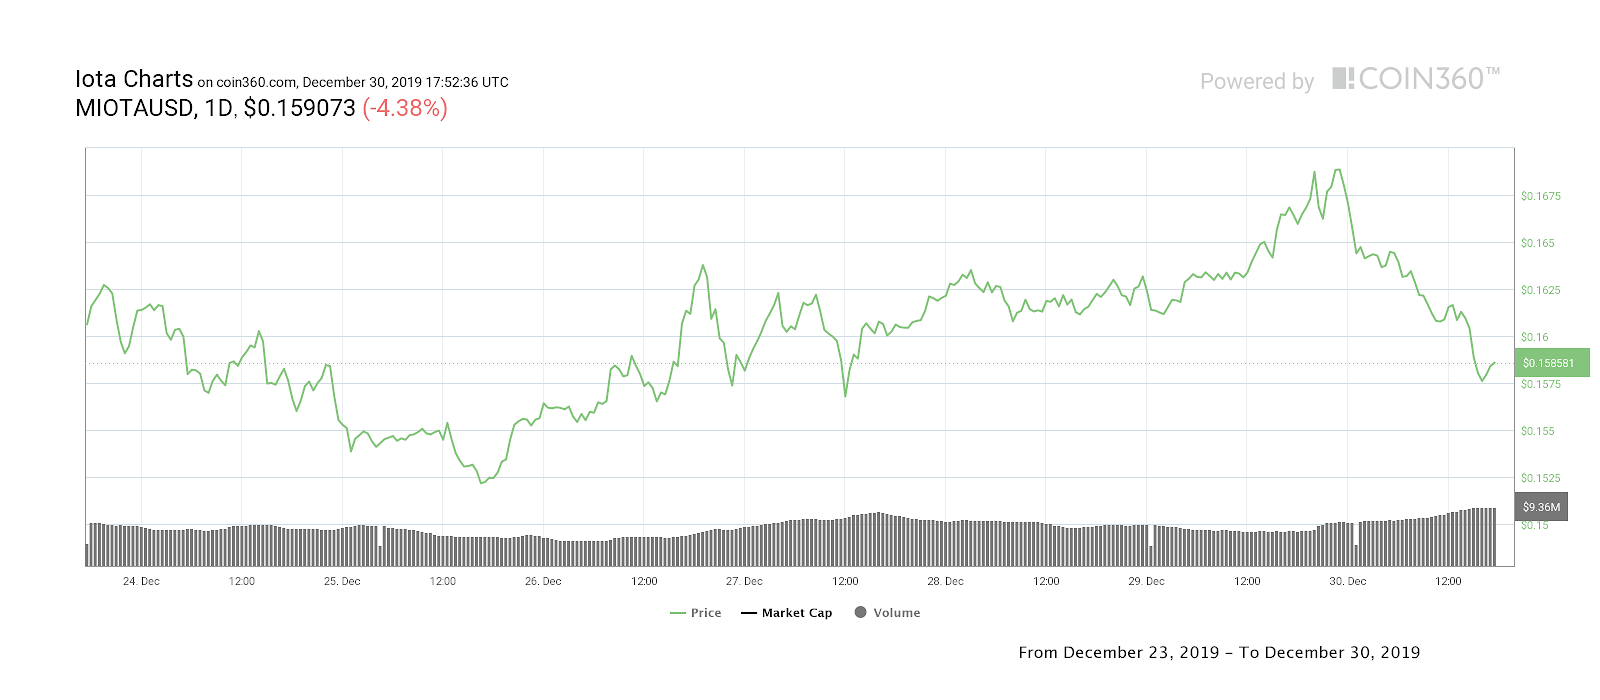 IOTA seven-day price chart. Source: Coin360